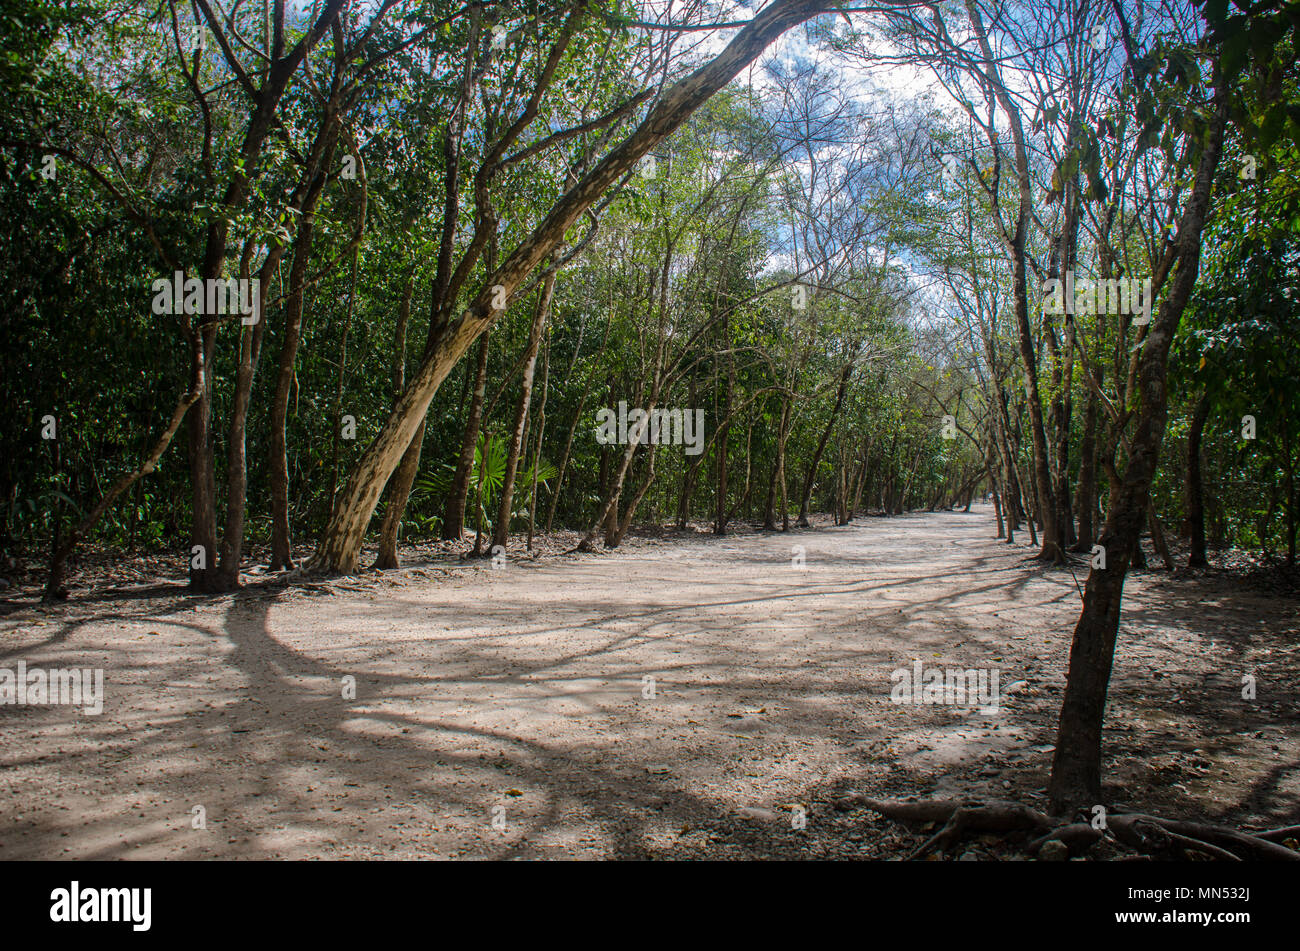 Road created by the ancient mayas at the Coba Jungle, Mexico Stock Photo